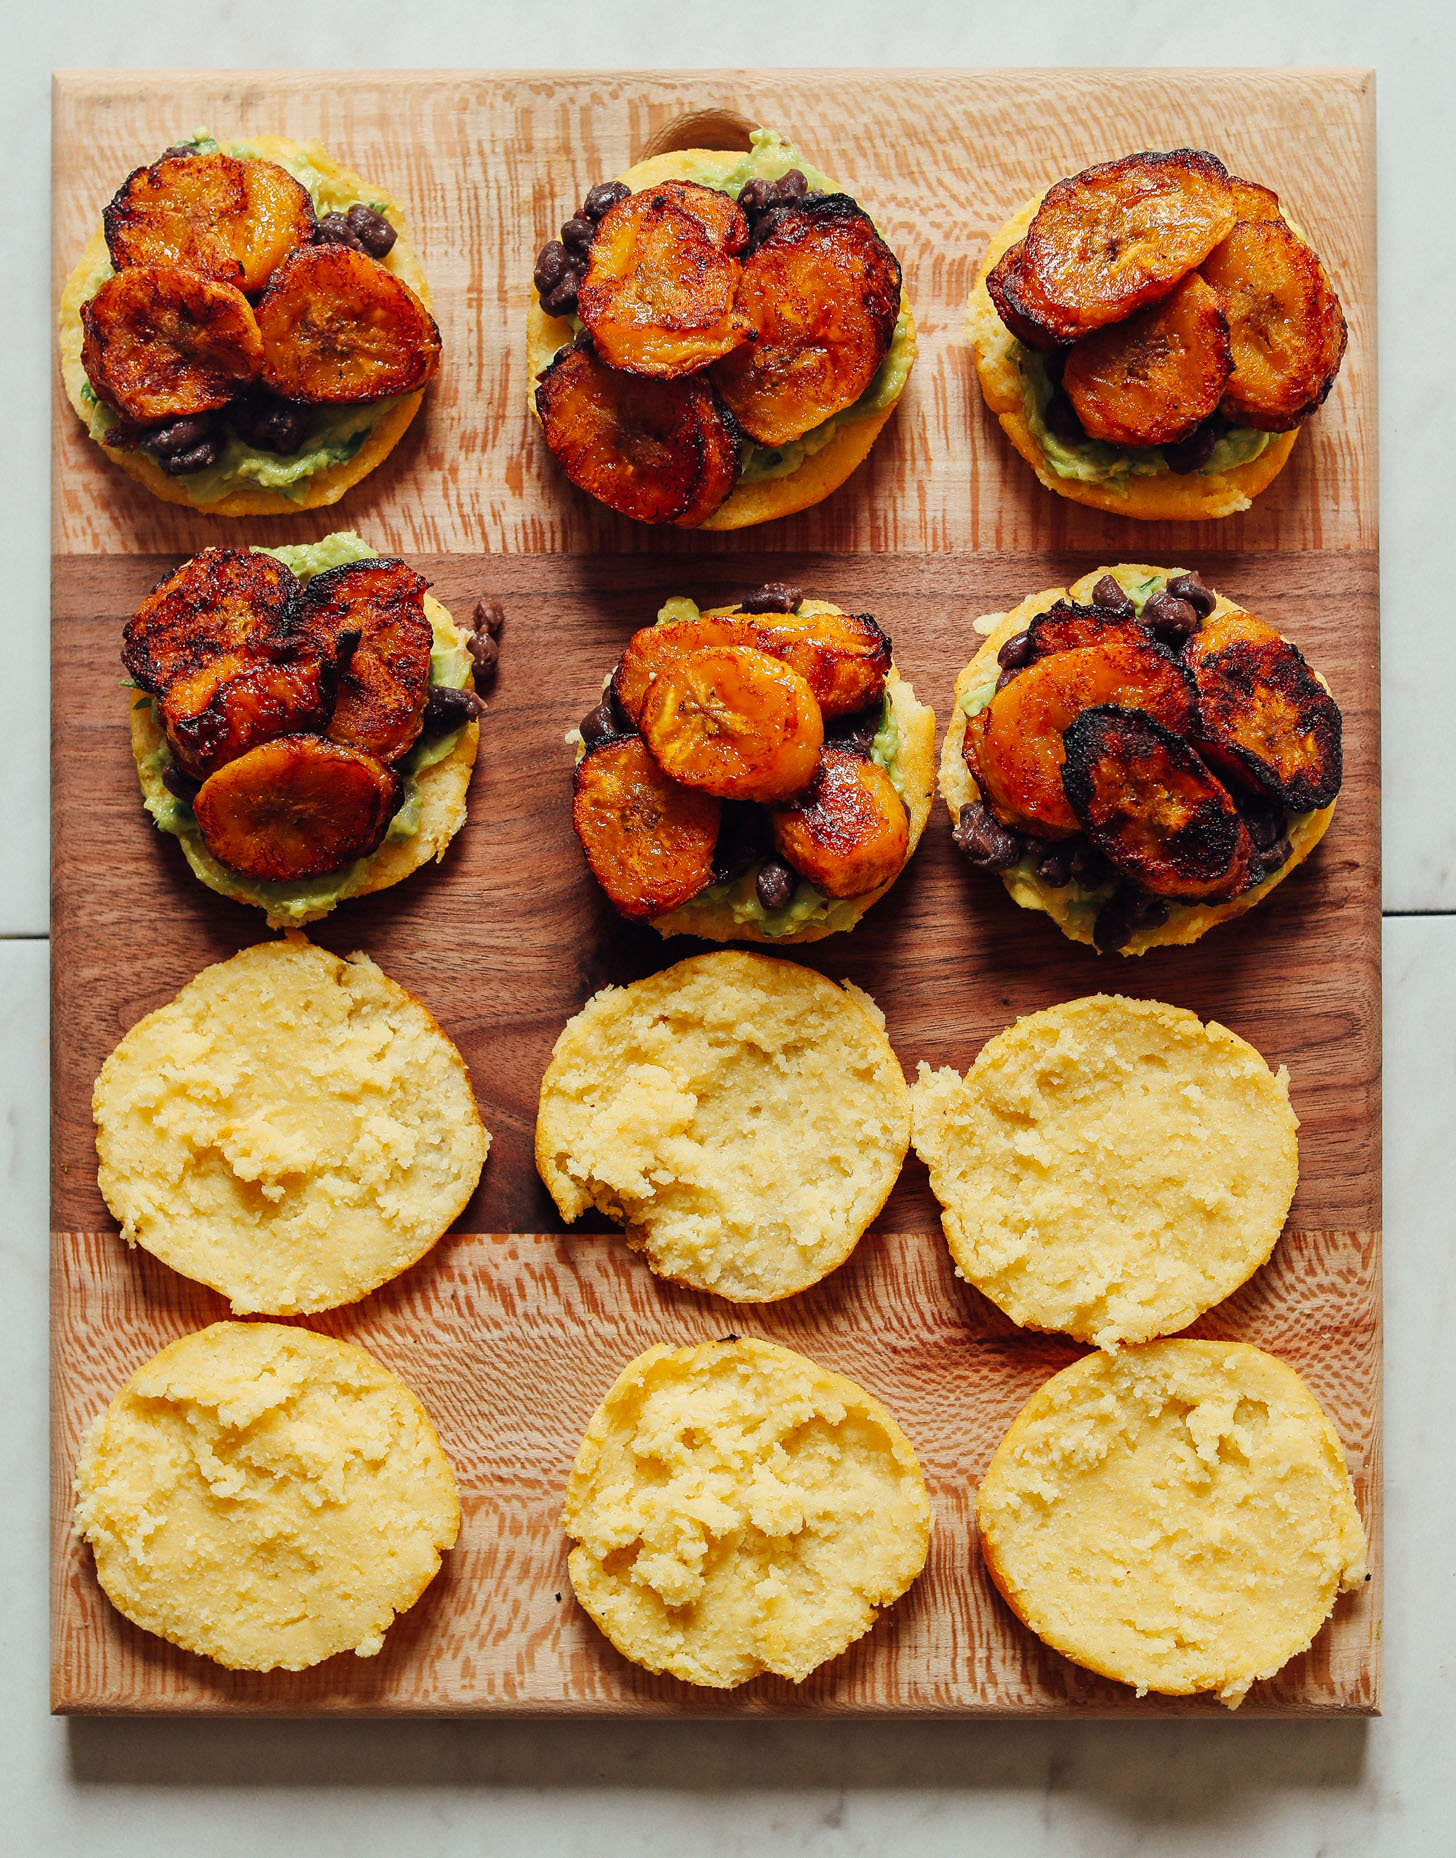 Open-faced Vegan Arepa Sandwiches topped with guacamole, black beans, and plantains